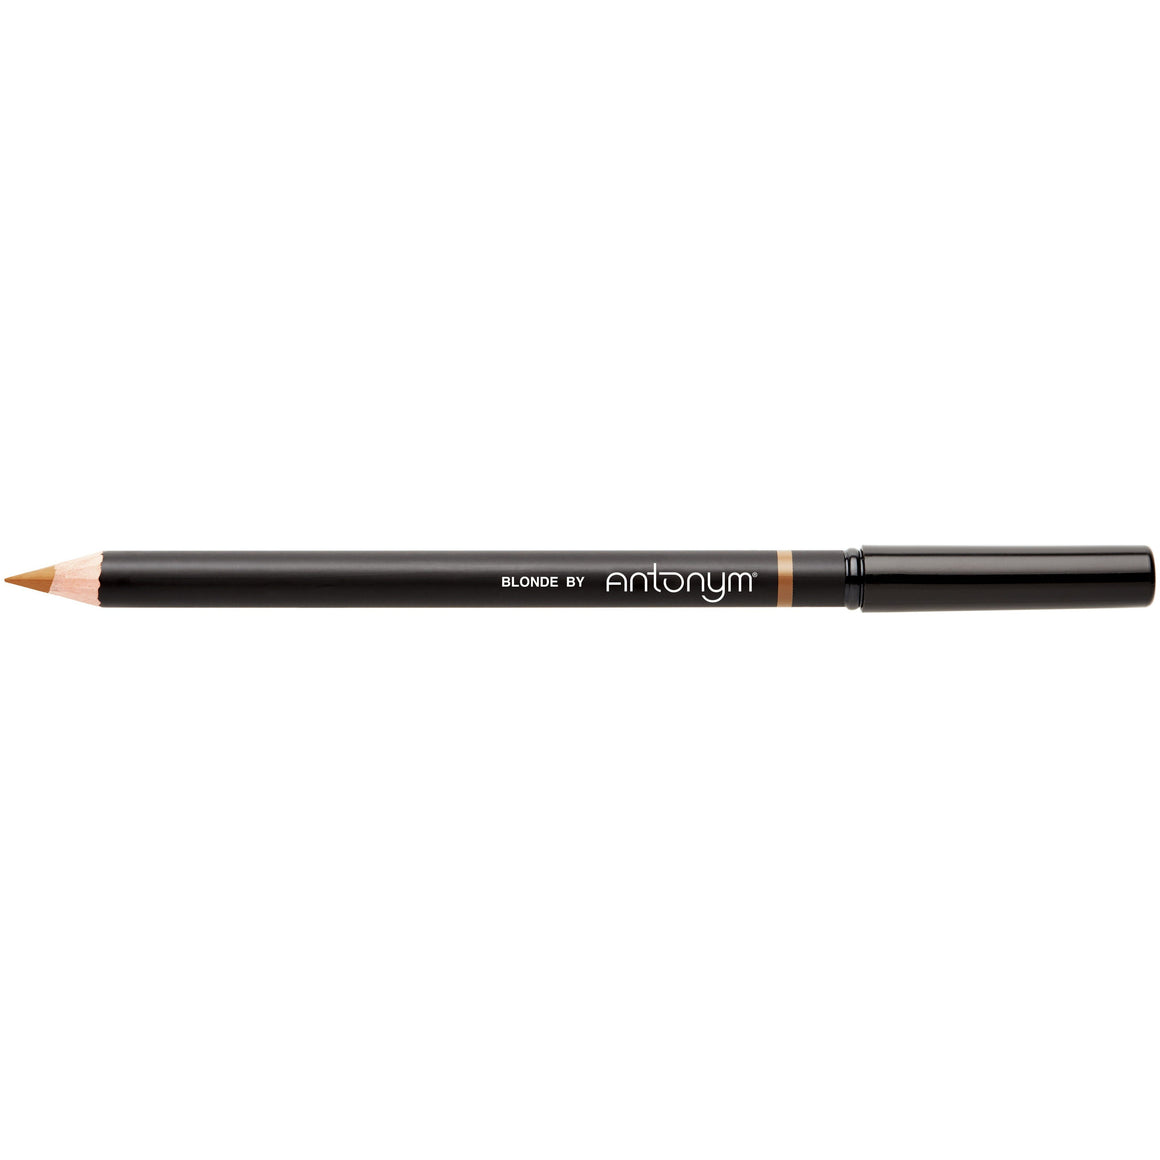 Eyebrow Pencil in Blonde -  Certified Natural by Antonym cosmetics